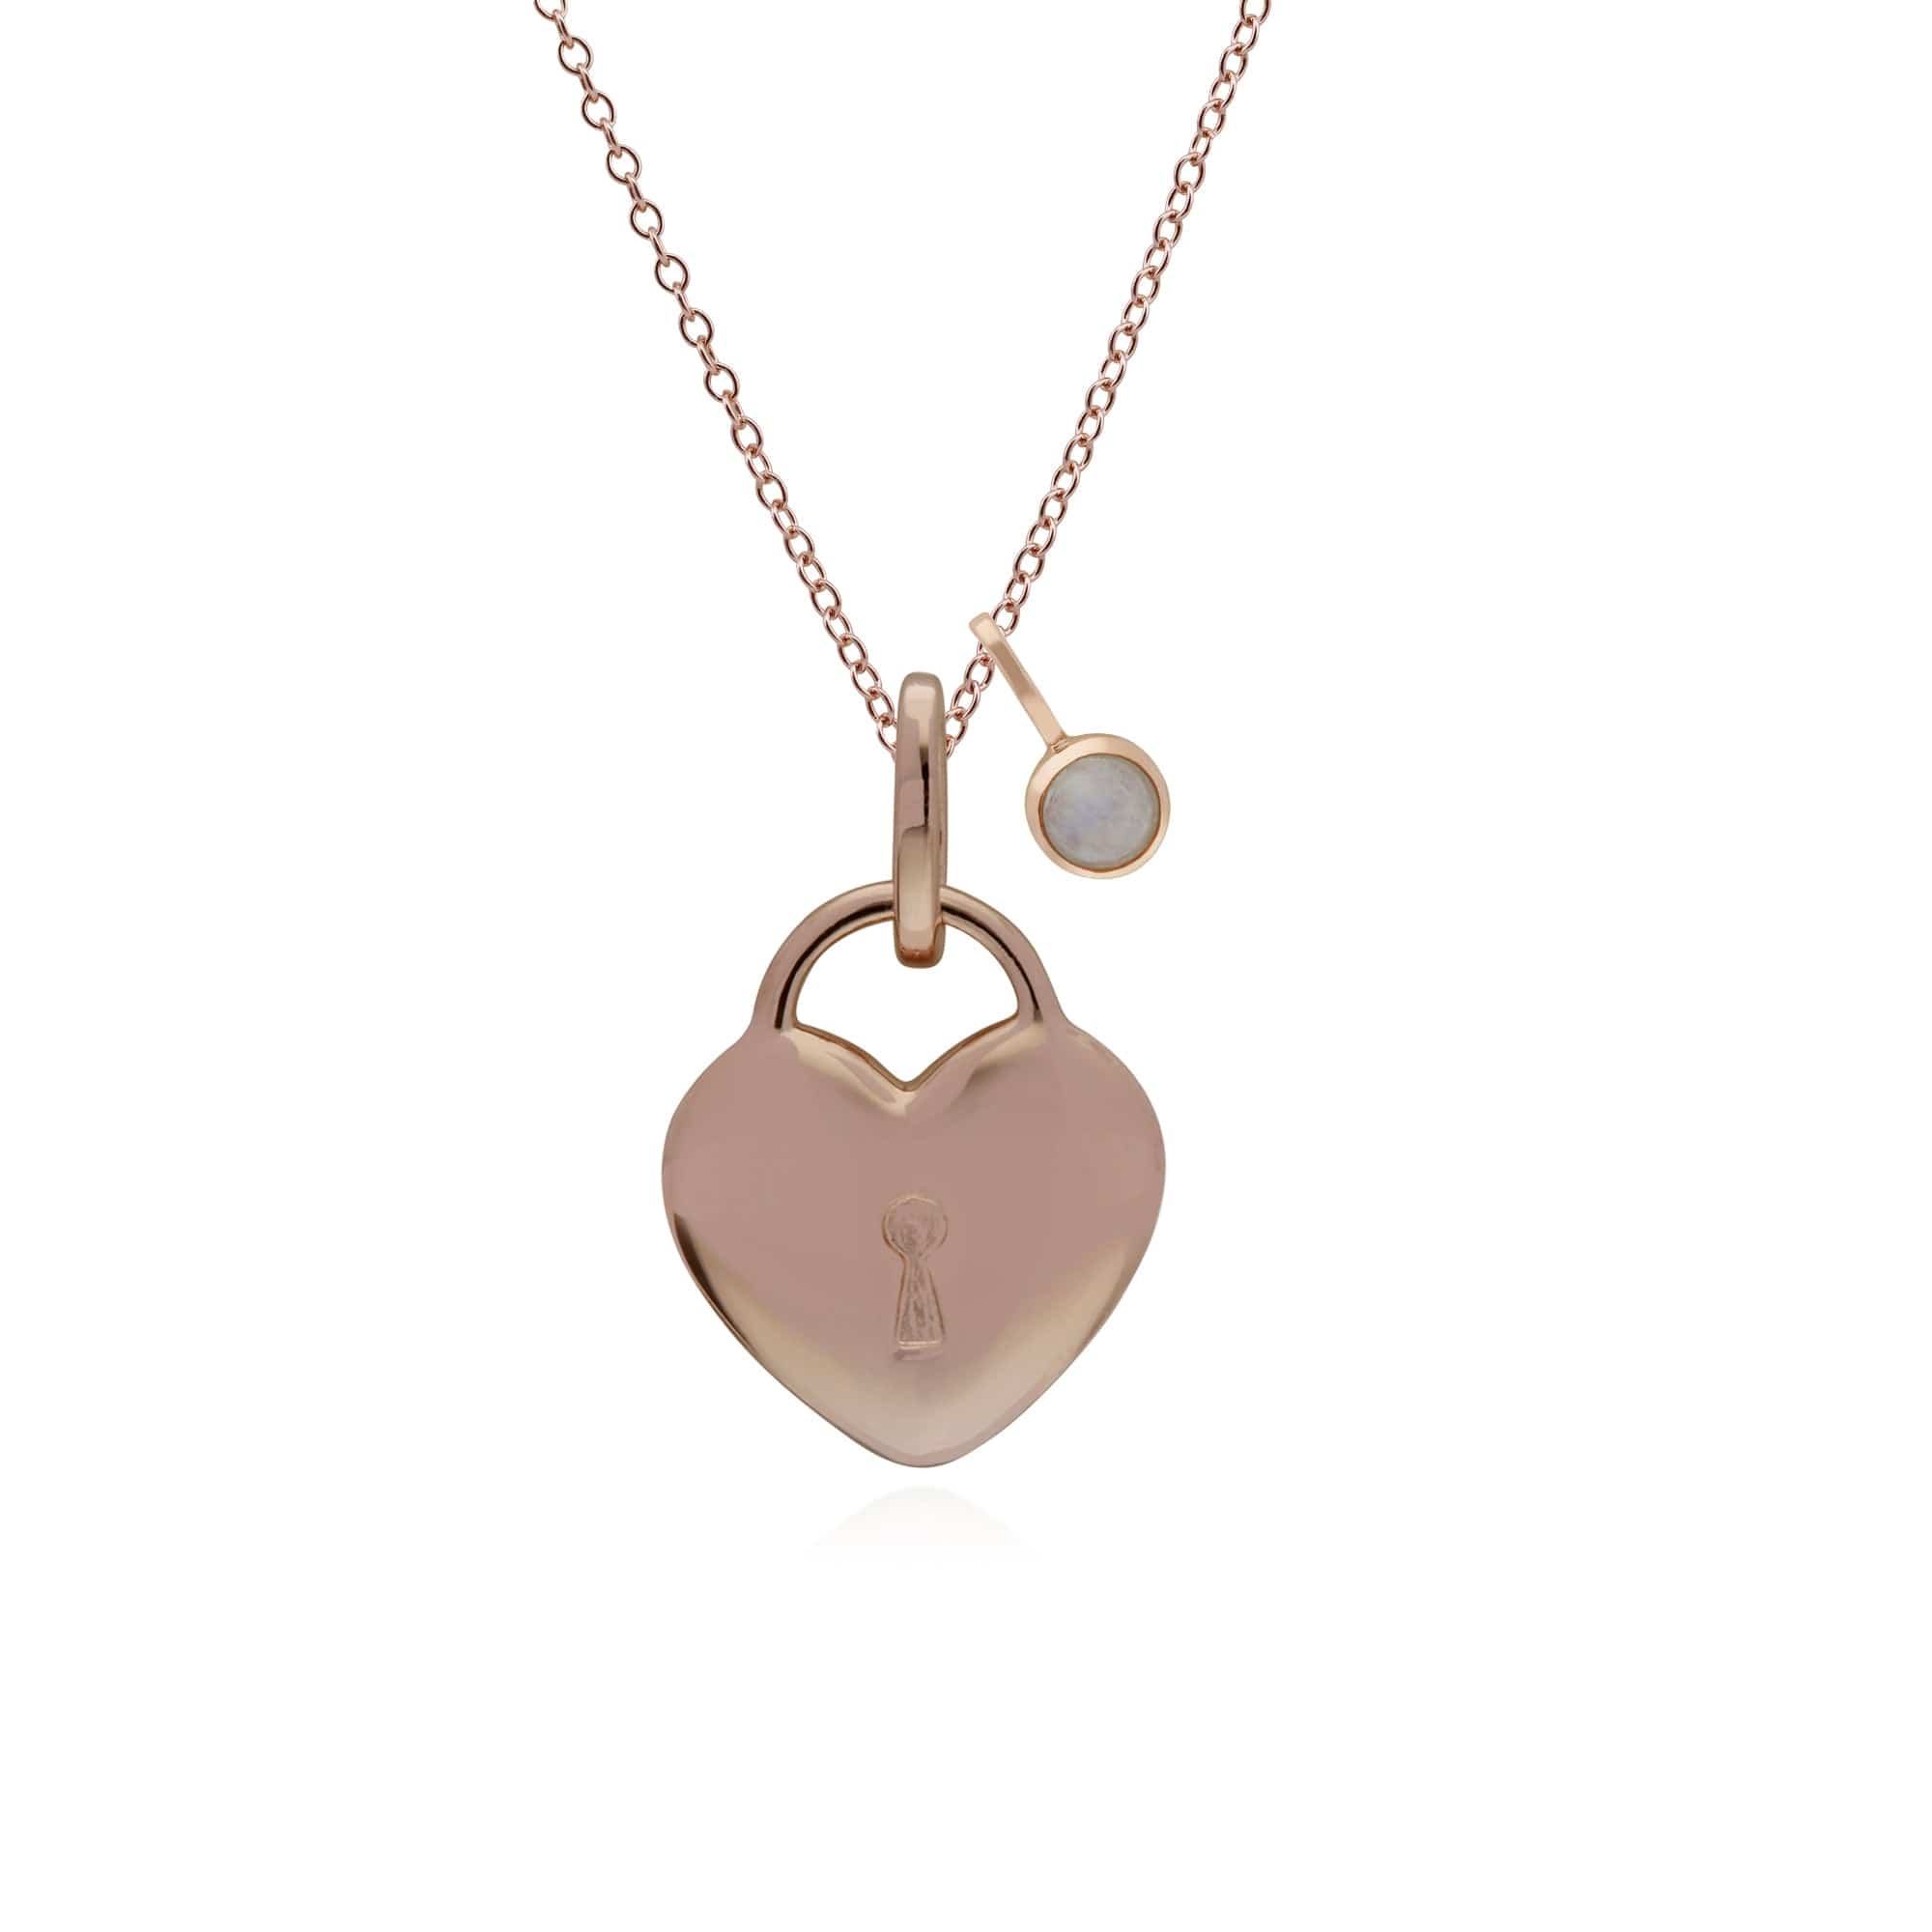 270P025902925-270P026901925 Classic Plain Heart Lock Pendant & Rainbow Moonstone Charm in Rose Gold Plated 925 Sterling Silver 1